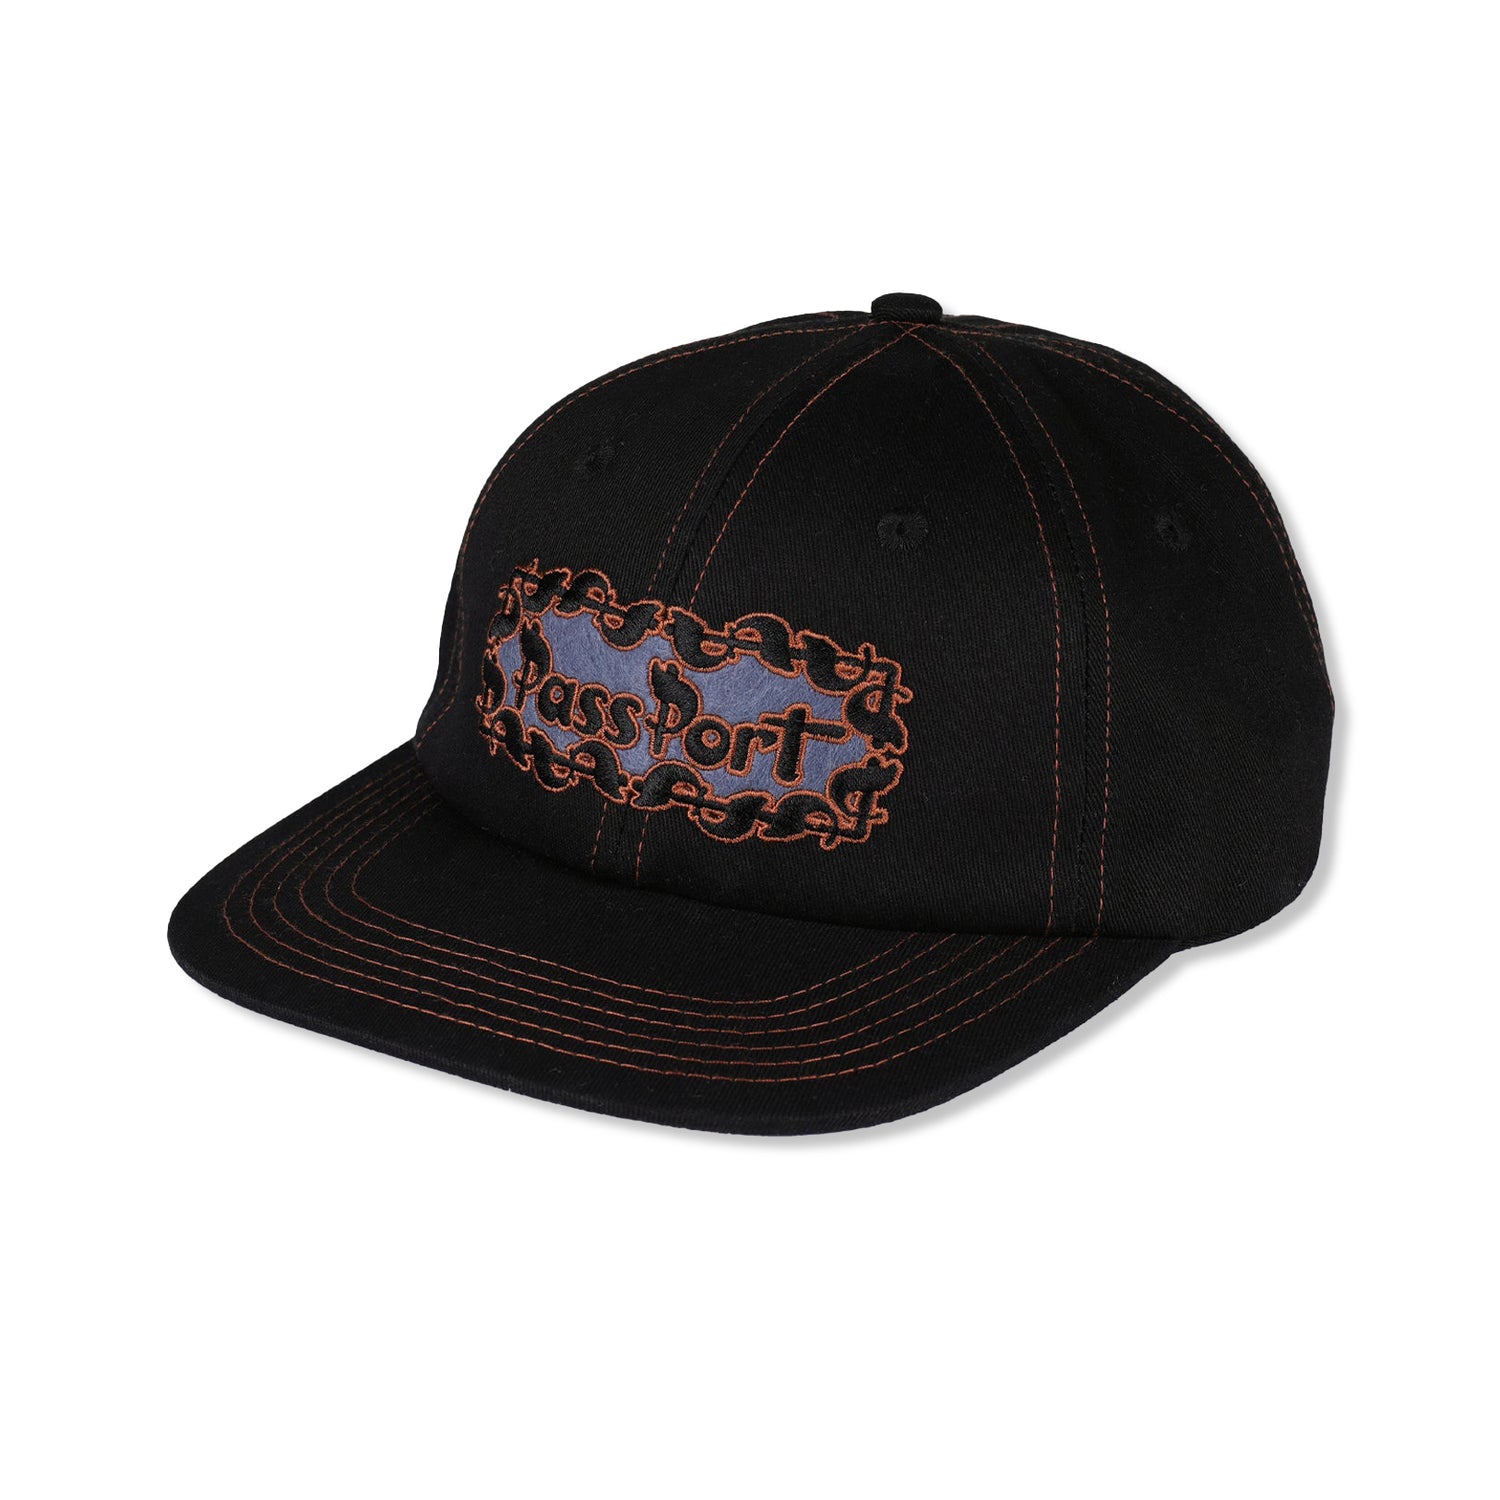 Pattoned Casual Hat, Black